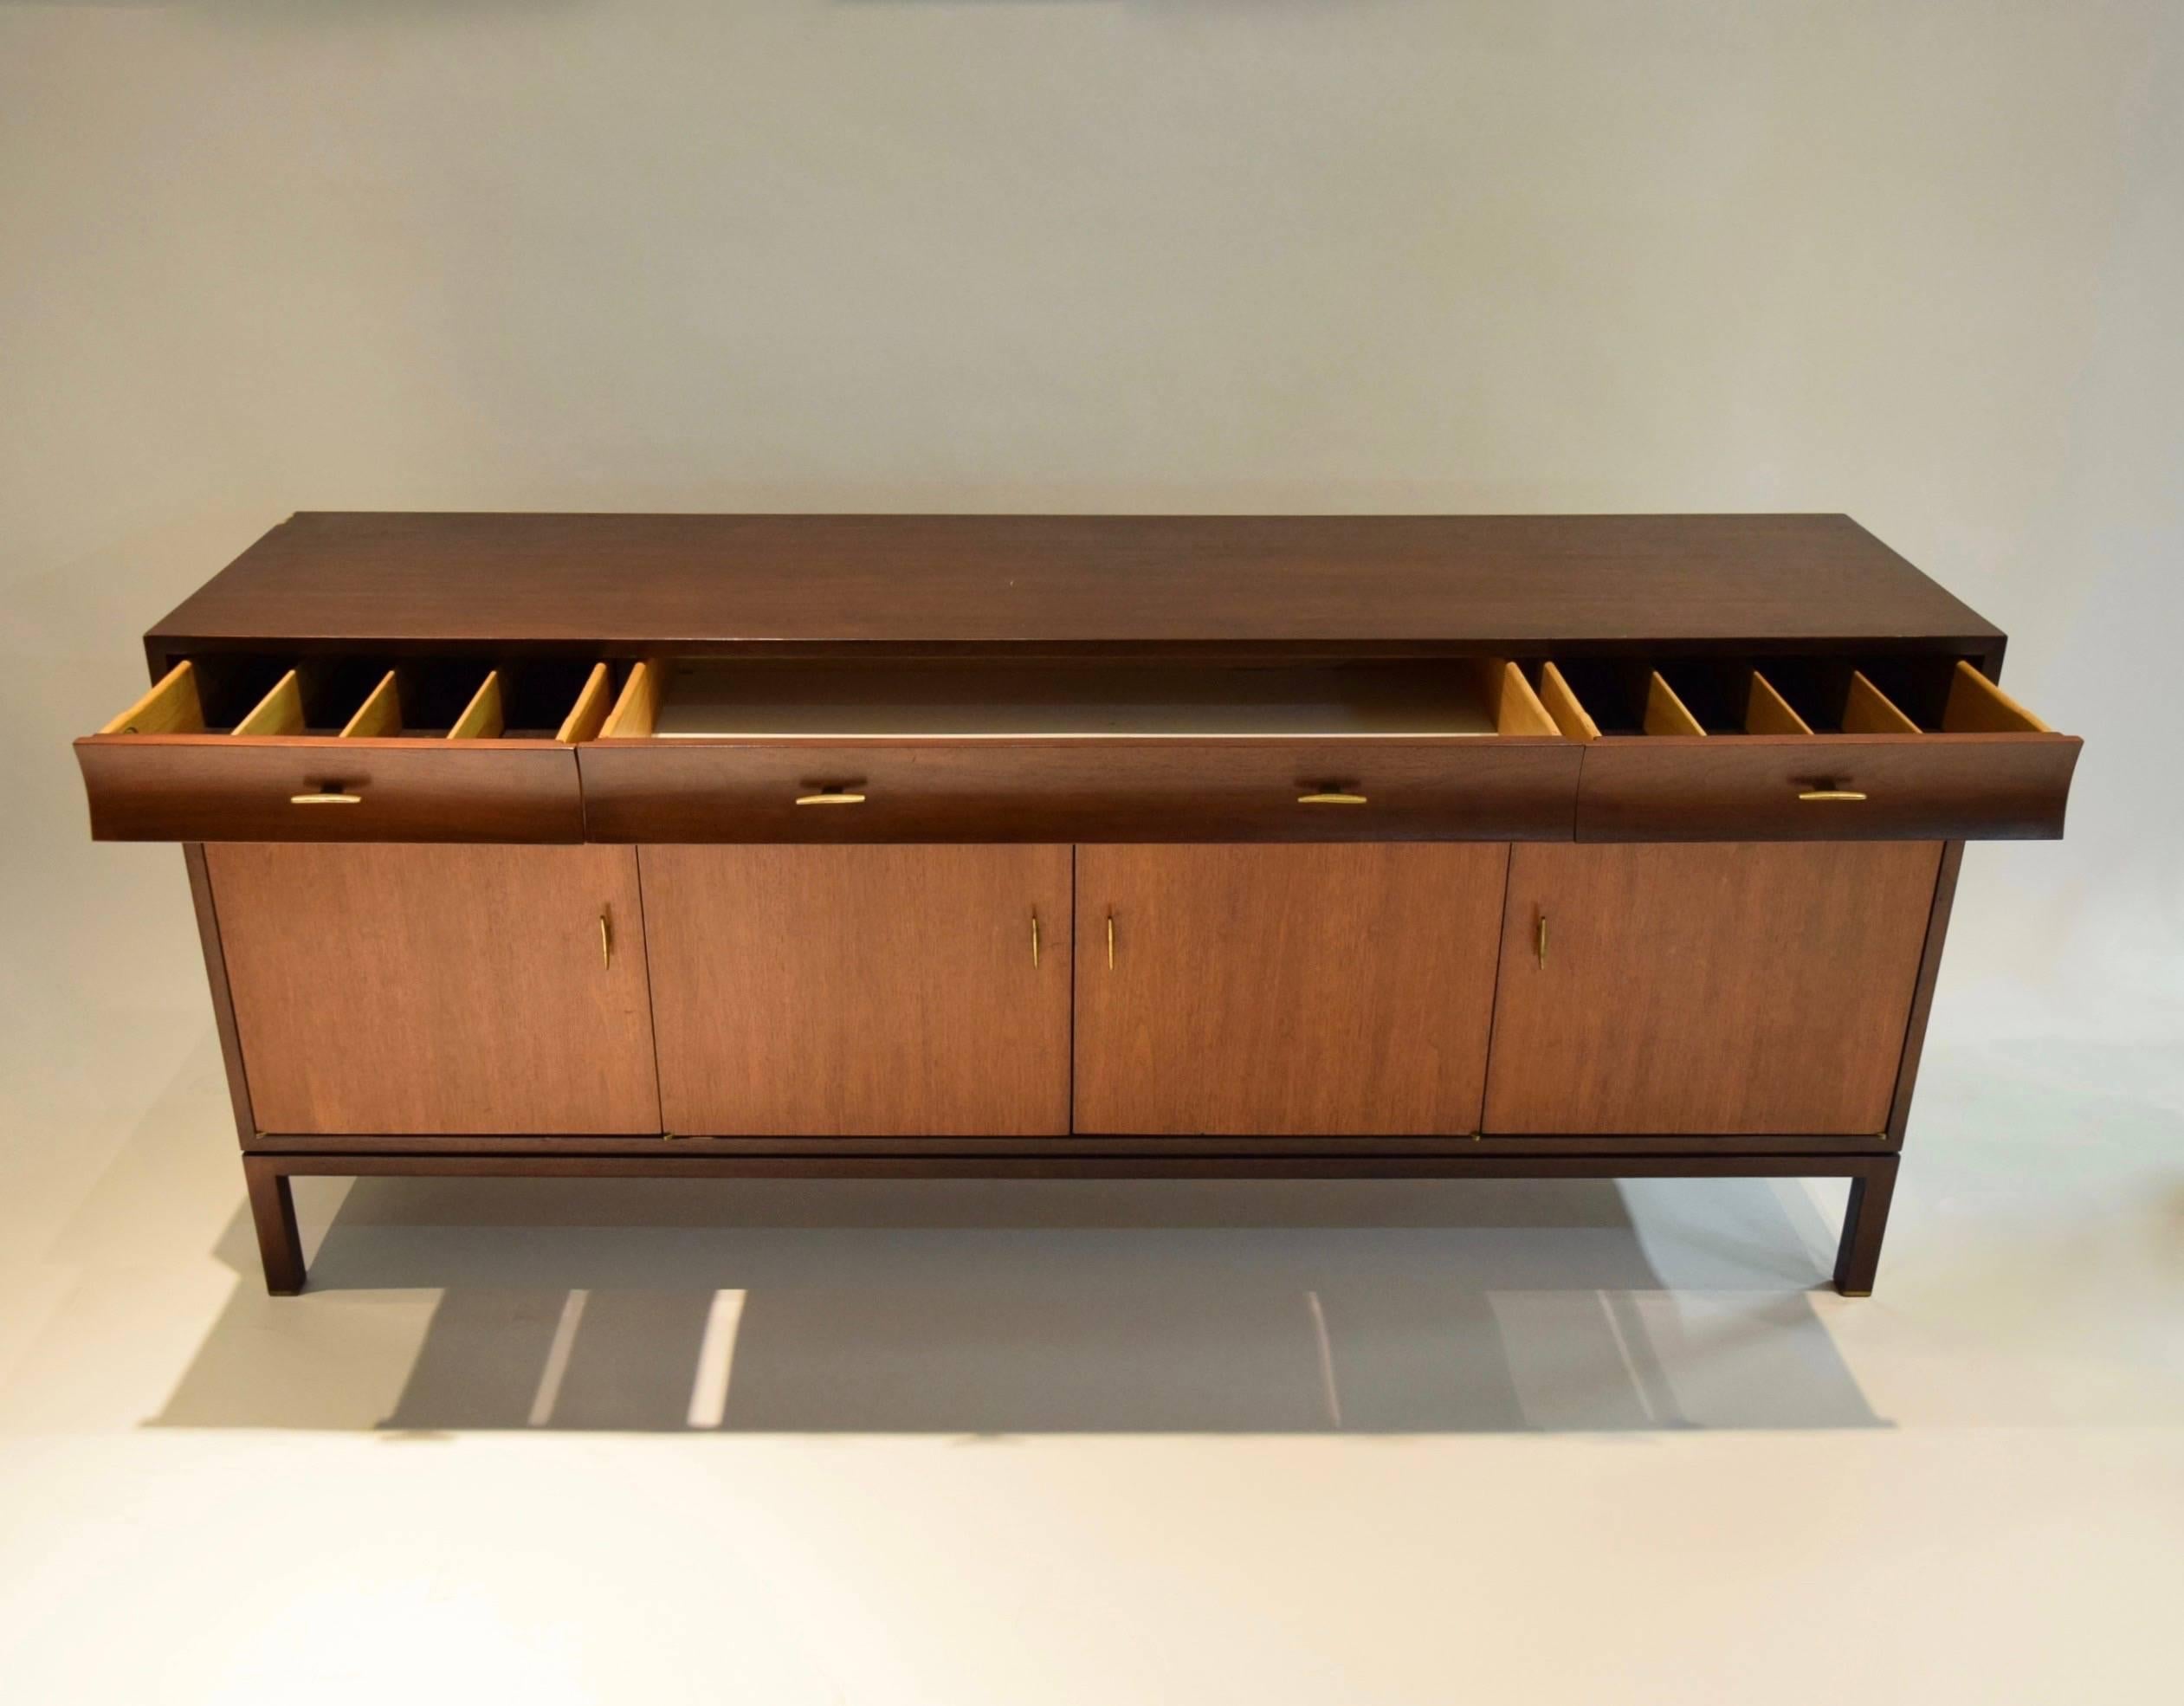 Sturdy and handsome buffet in very good, original condition by Edward Wormley for Dunbar in walnut wood with brass wishbone pulls and original labels.
There are four doors on the lower portion of the credenza and three concaving/ curved drawers in